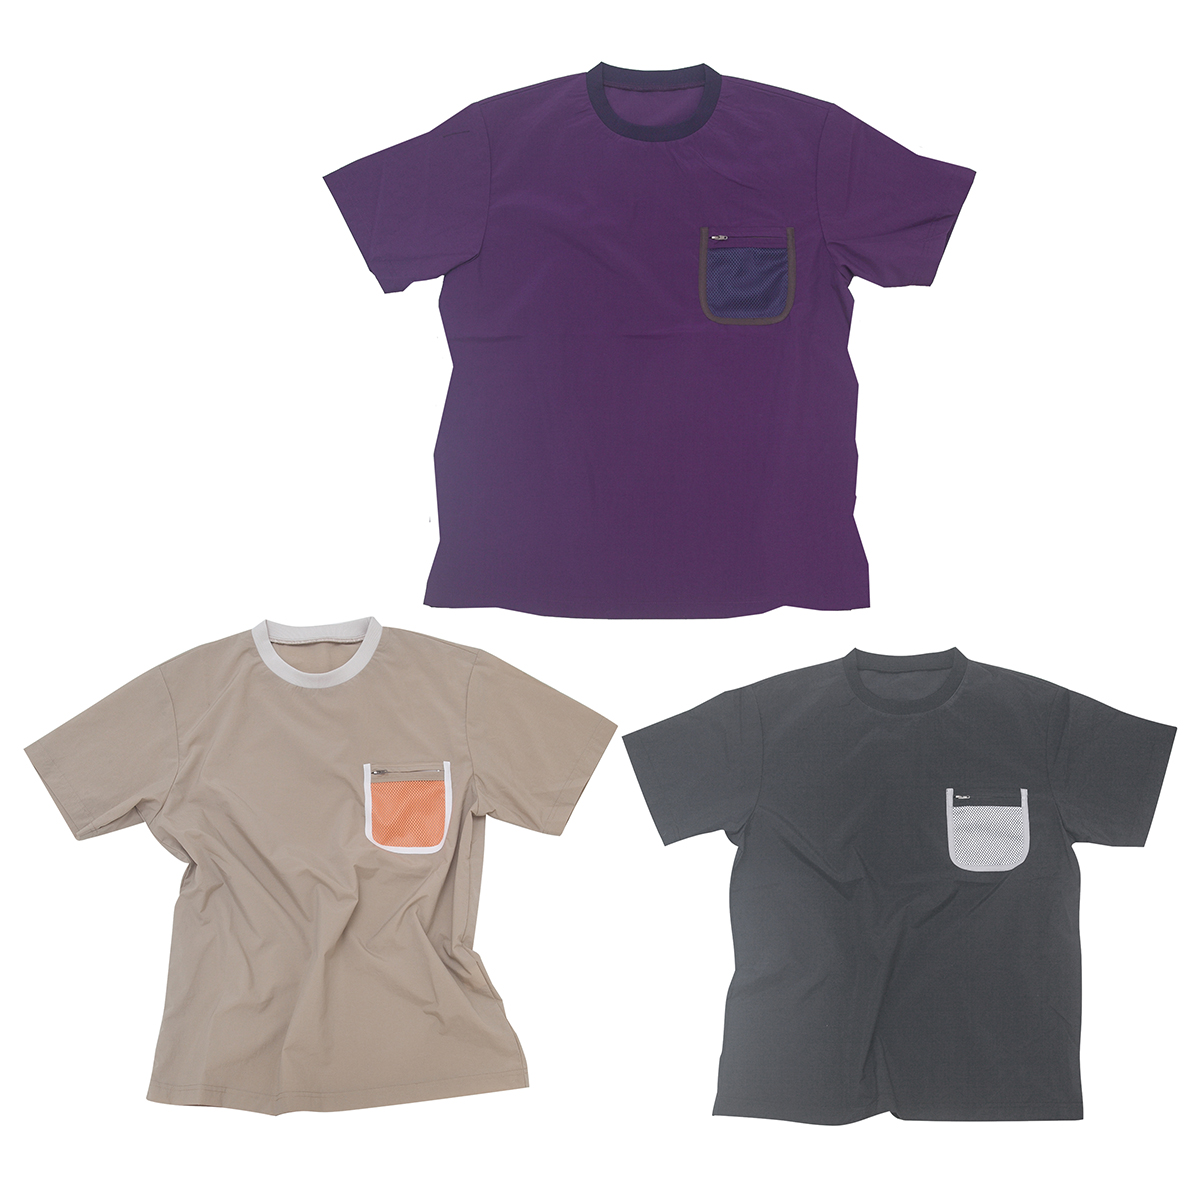 AWESOME TEE オーサム T シャツ Number : s20-so-11 Fabric : Nylon 100% Size : S, M, L, XL Color:Purple, Beige, Black Price : ¥8,000